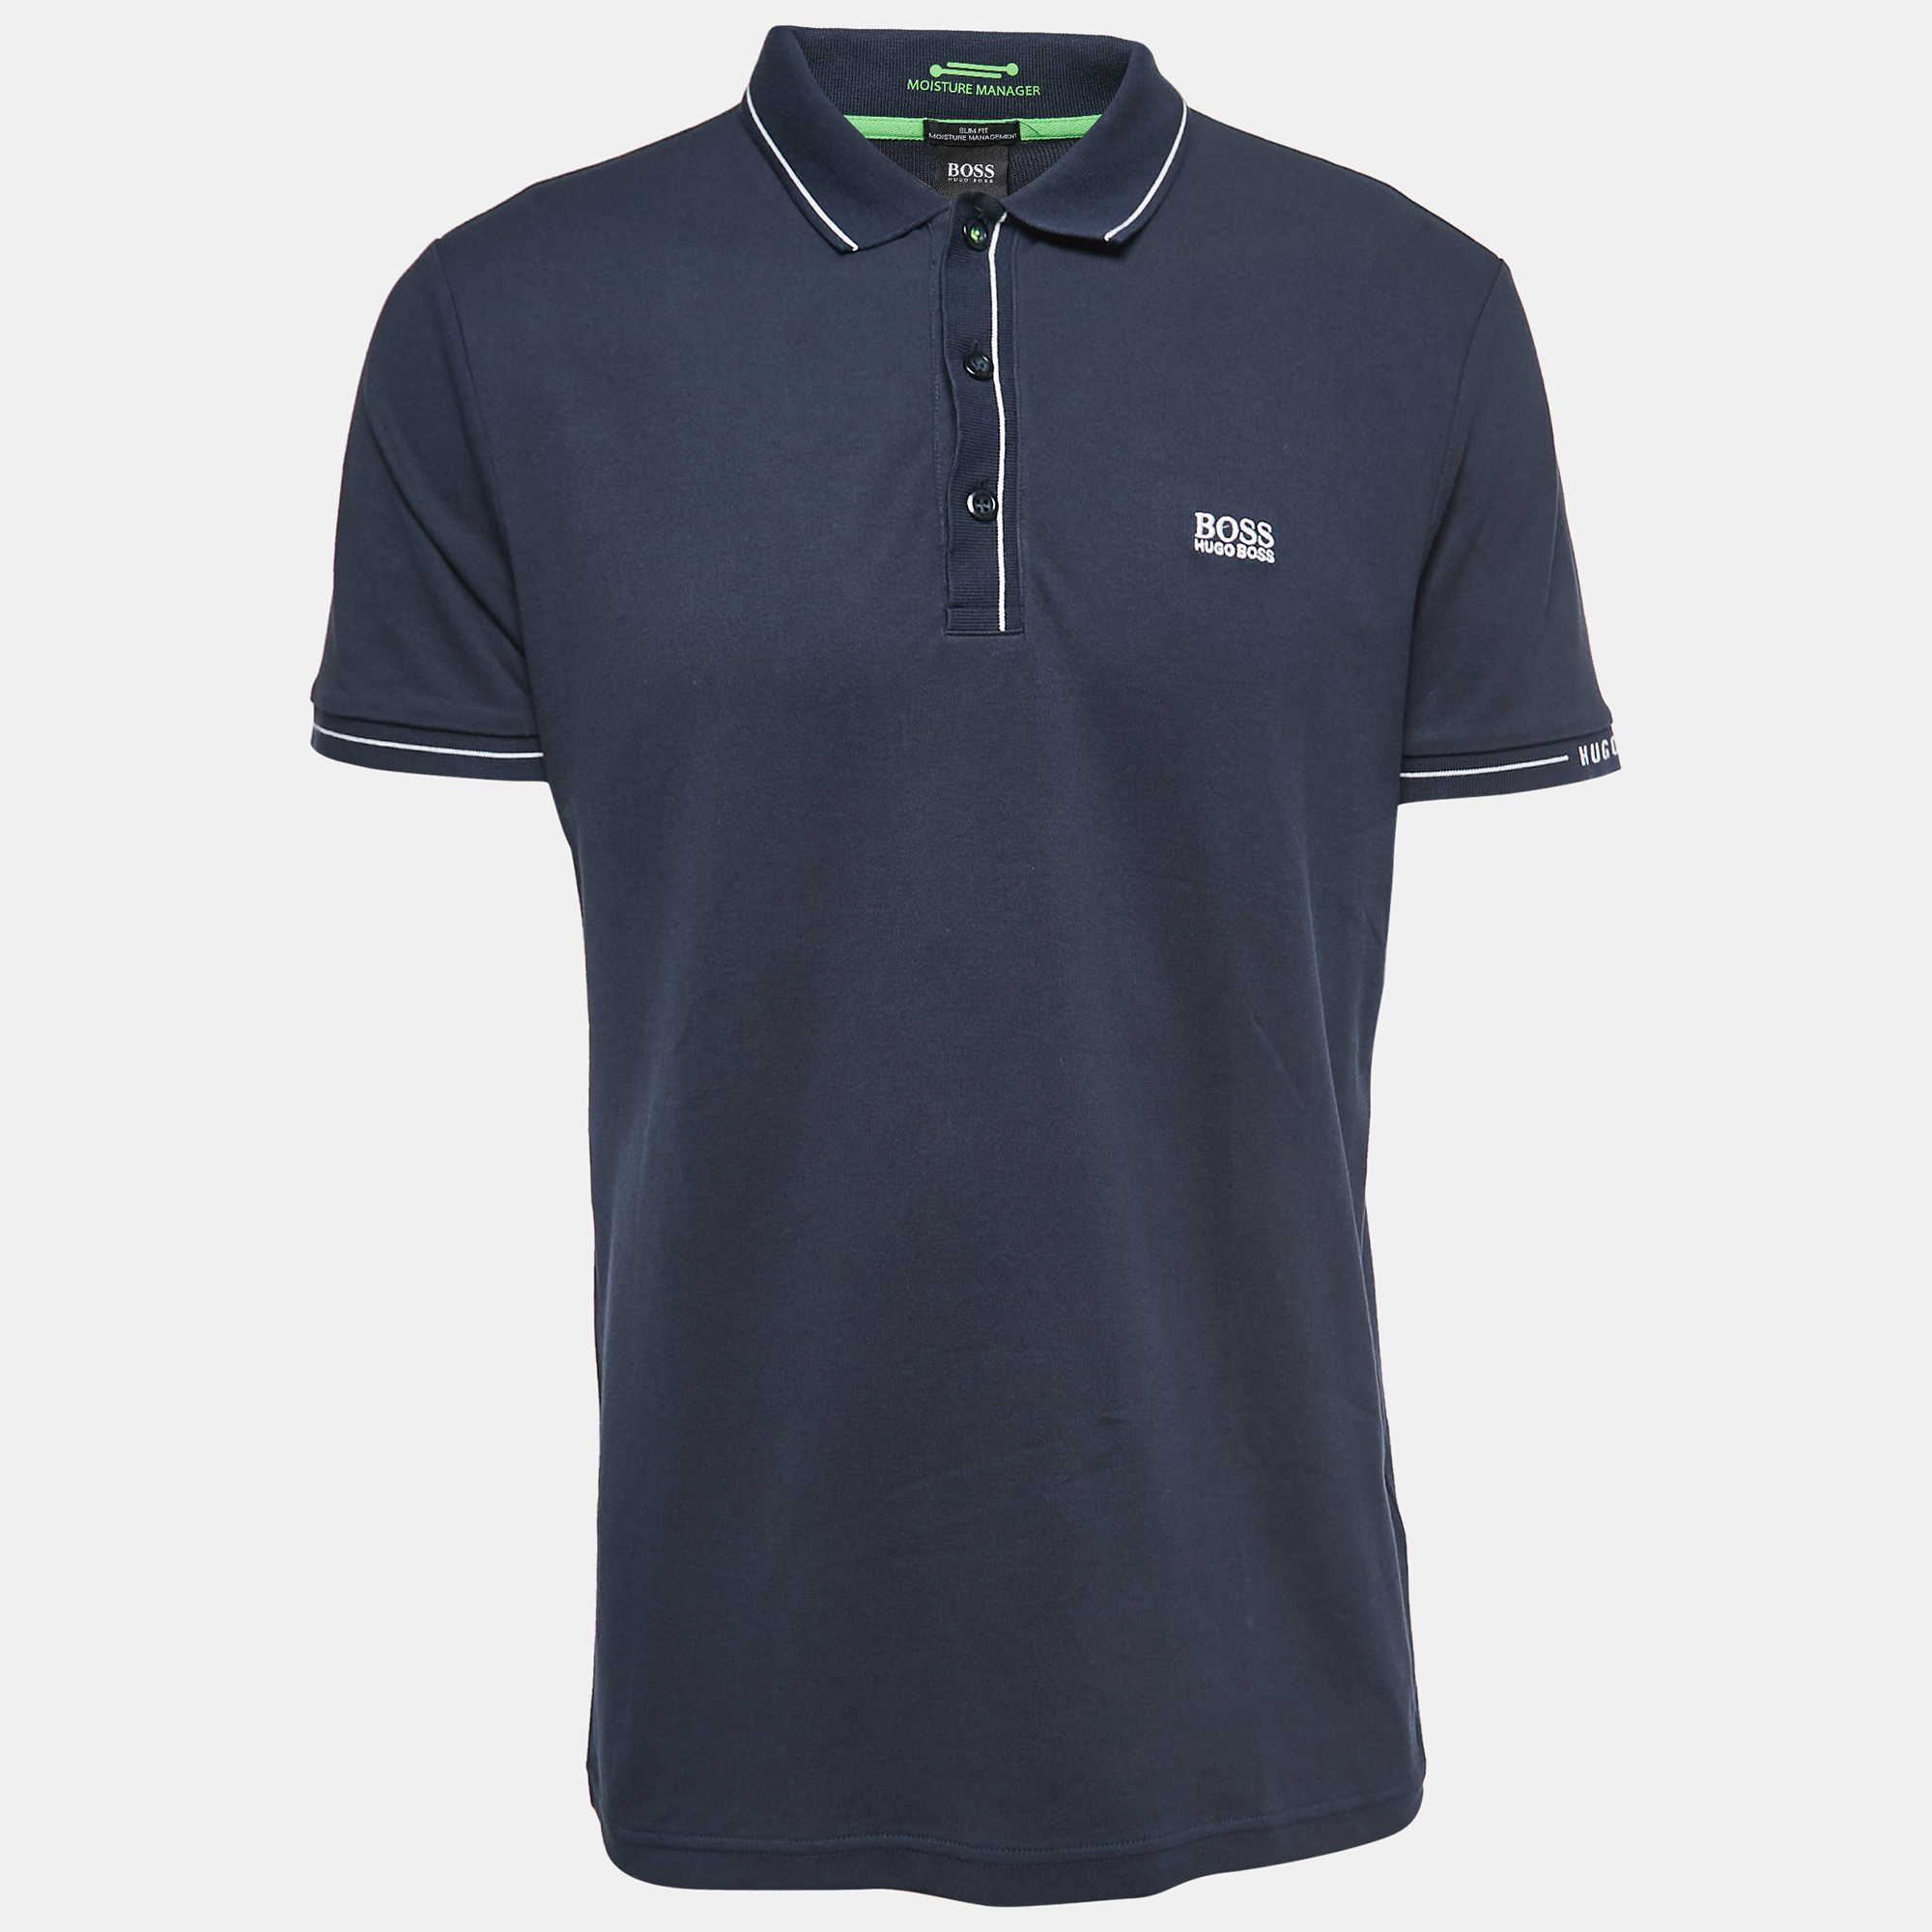 

Boss By Hugo Boss Navy Blue Cotton Pique Moisture Manager Slim Fit Polo T-Shirt